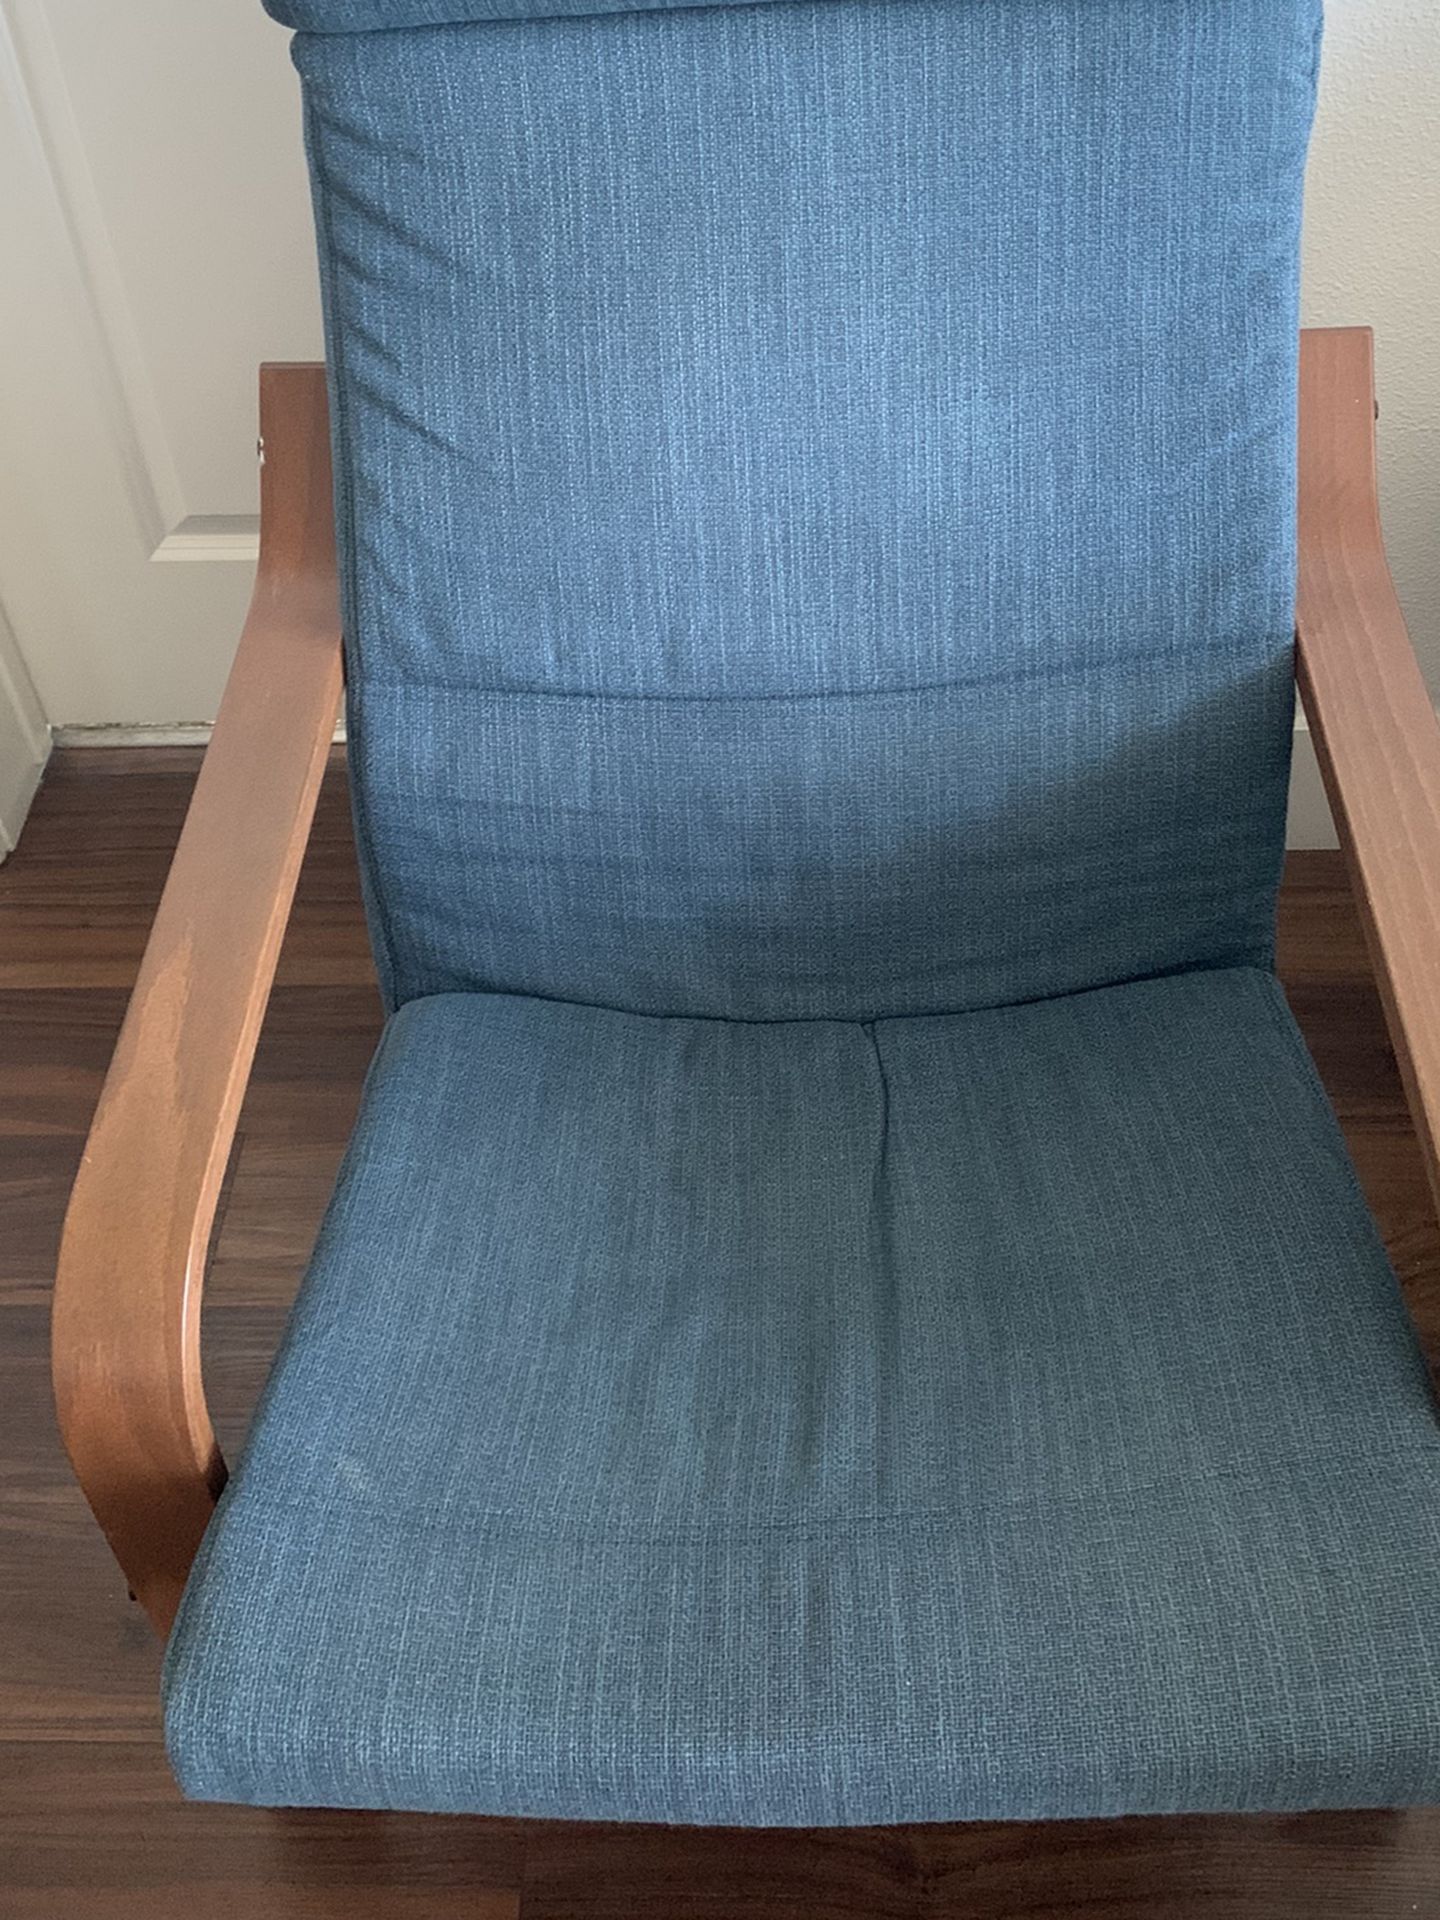 Ikea Chair With Missing Screw